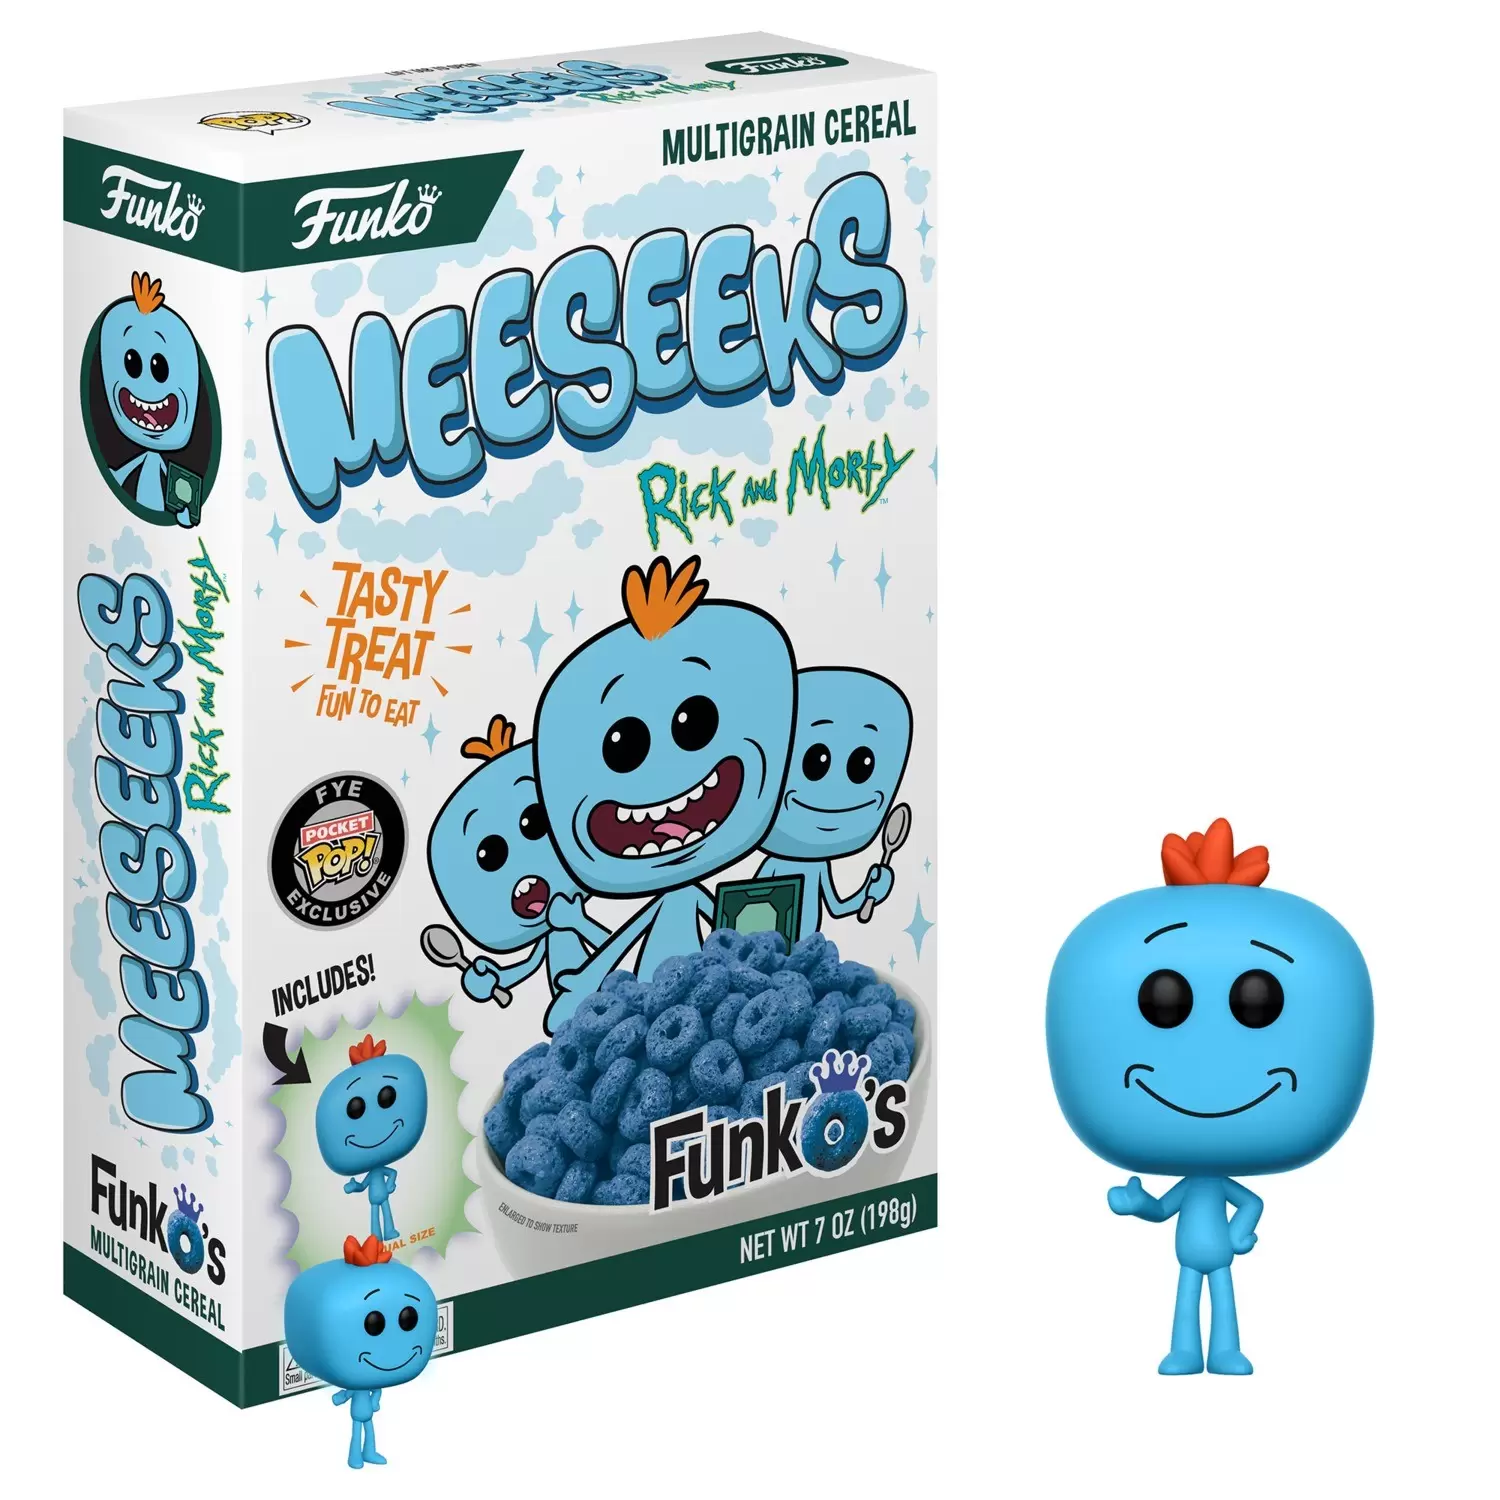 Pocket Pop! and Pop Minis! - Rick and Morty - Mr. Meeseeks